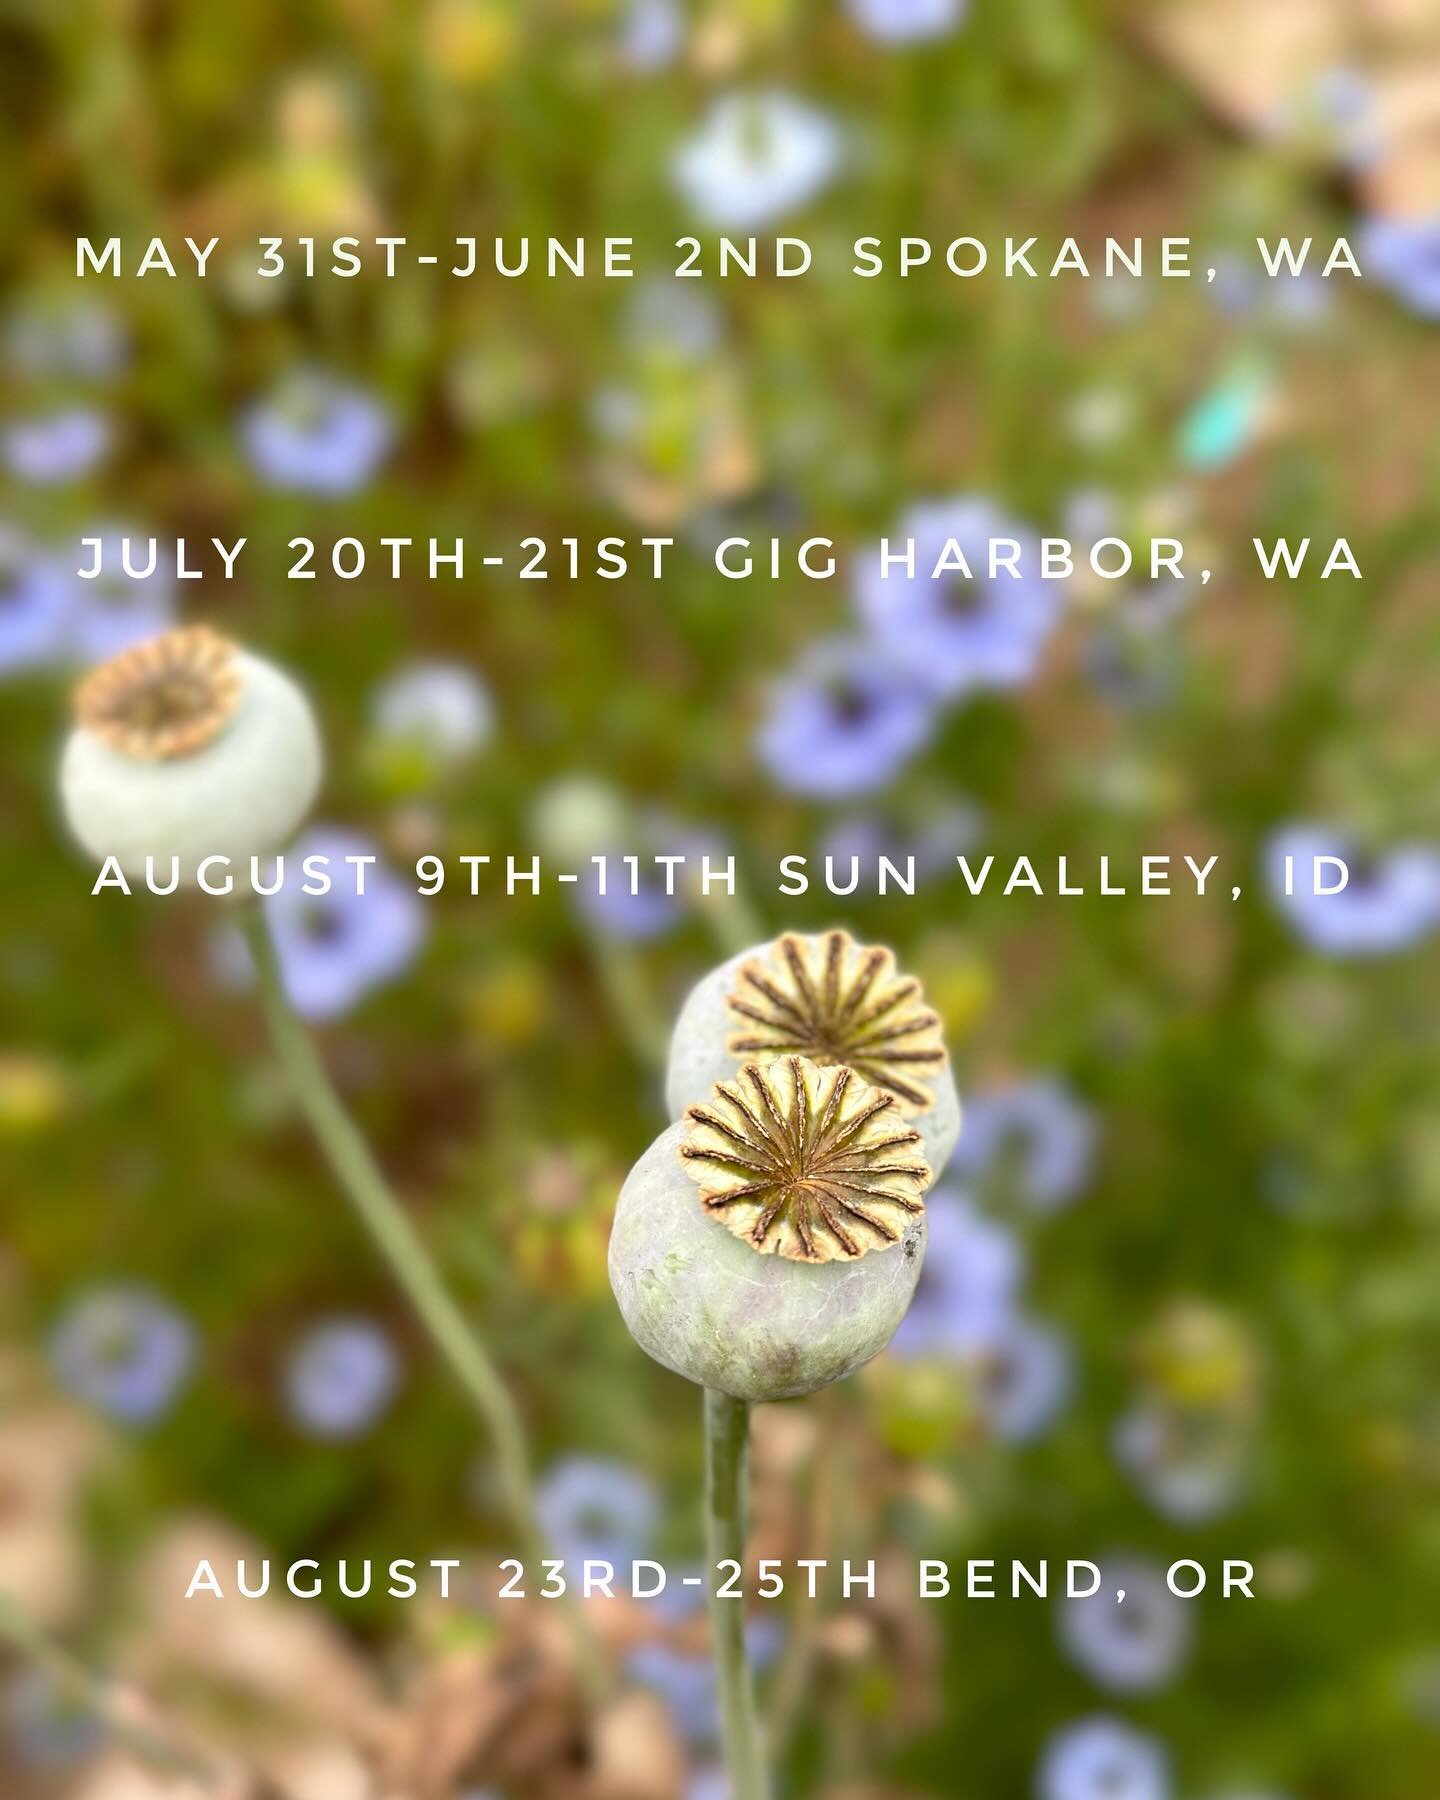 The summer art show schedule is set! ☀️ Hope to see you at one of these events around the Pacific Northwest.  All will be new for me this year! 🌈

#pacificnorthwest #artshows #leathercraftartist #finecraft #fineart #spokaneartfest #gigharborartfesti